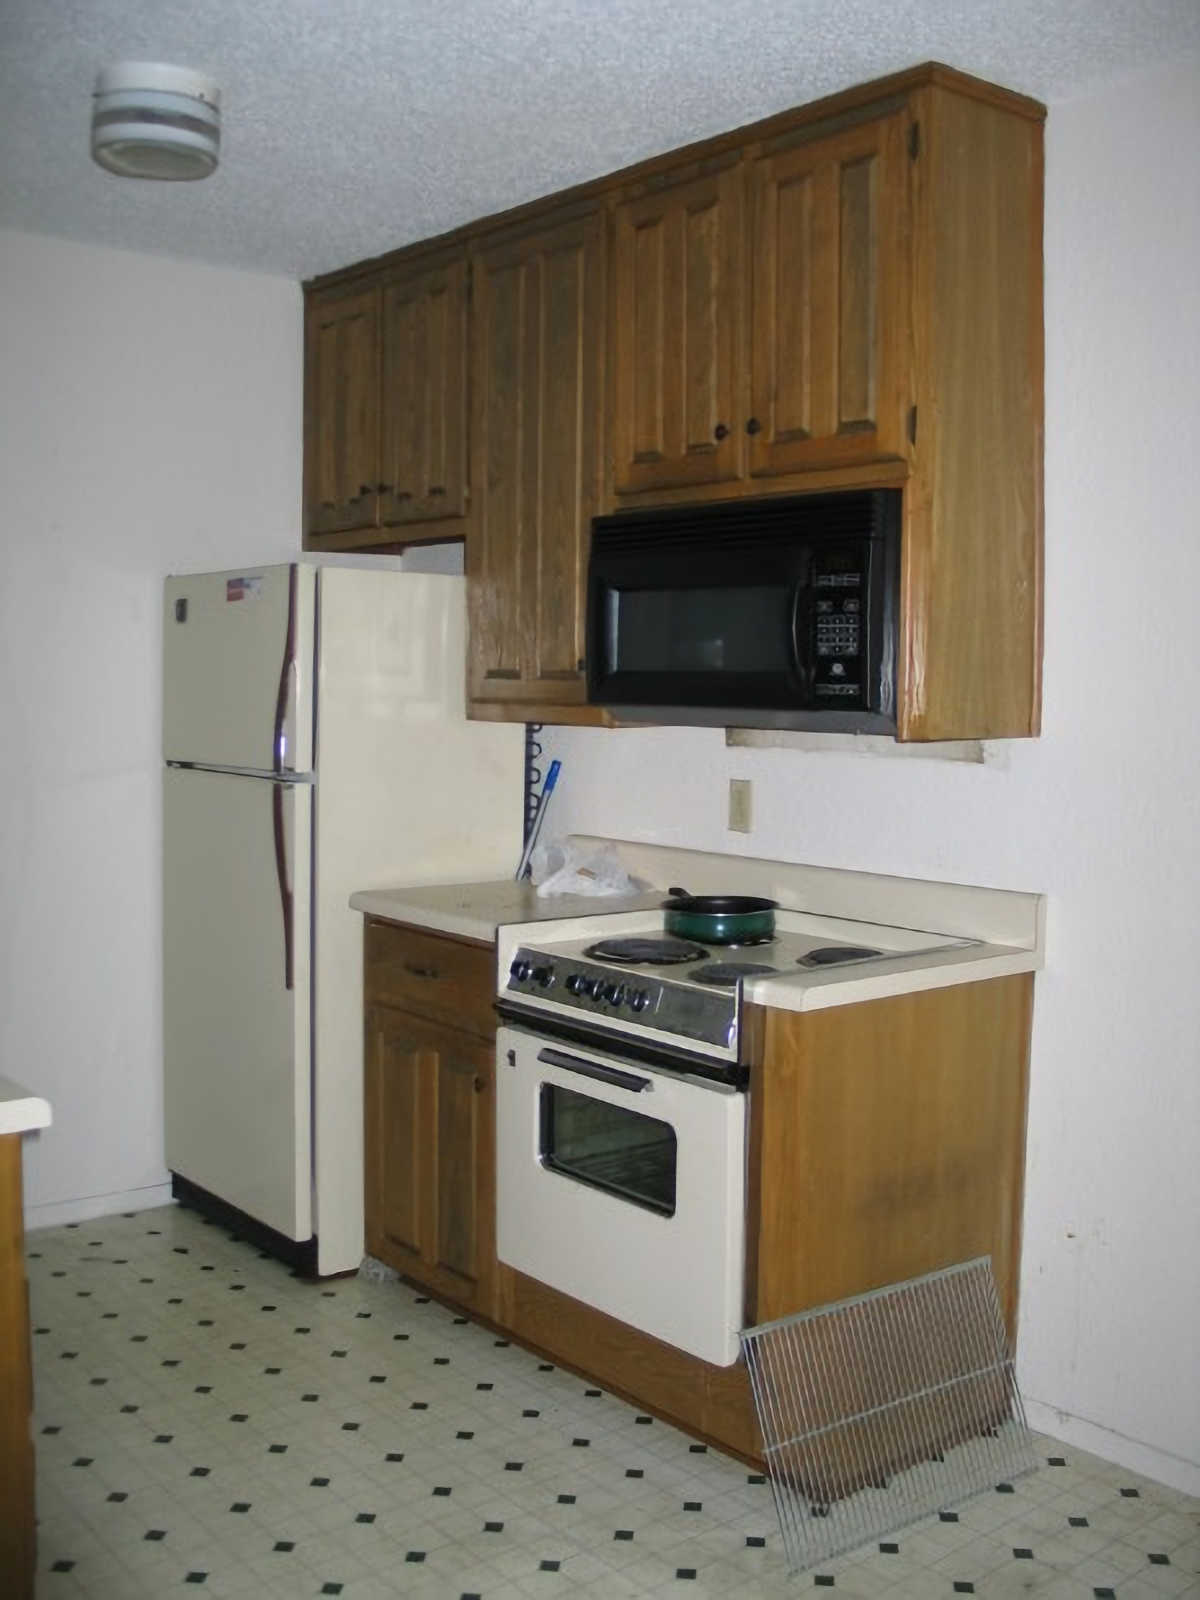 Original 1984 tiny condo kitchen with old appliances and stained wood cabinets